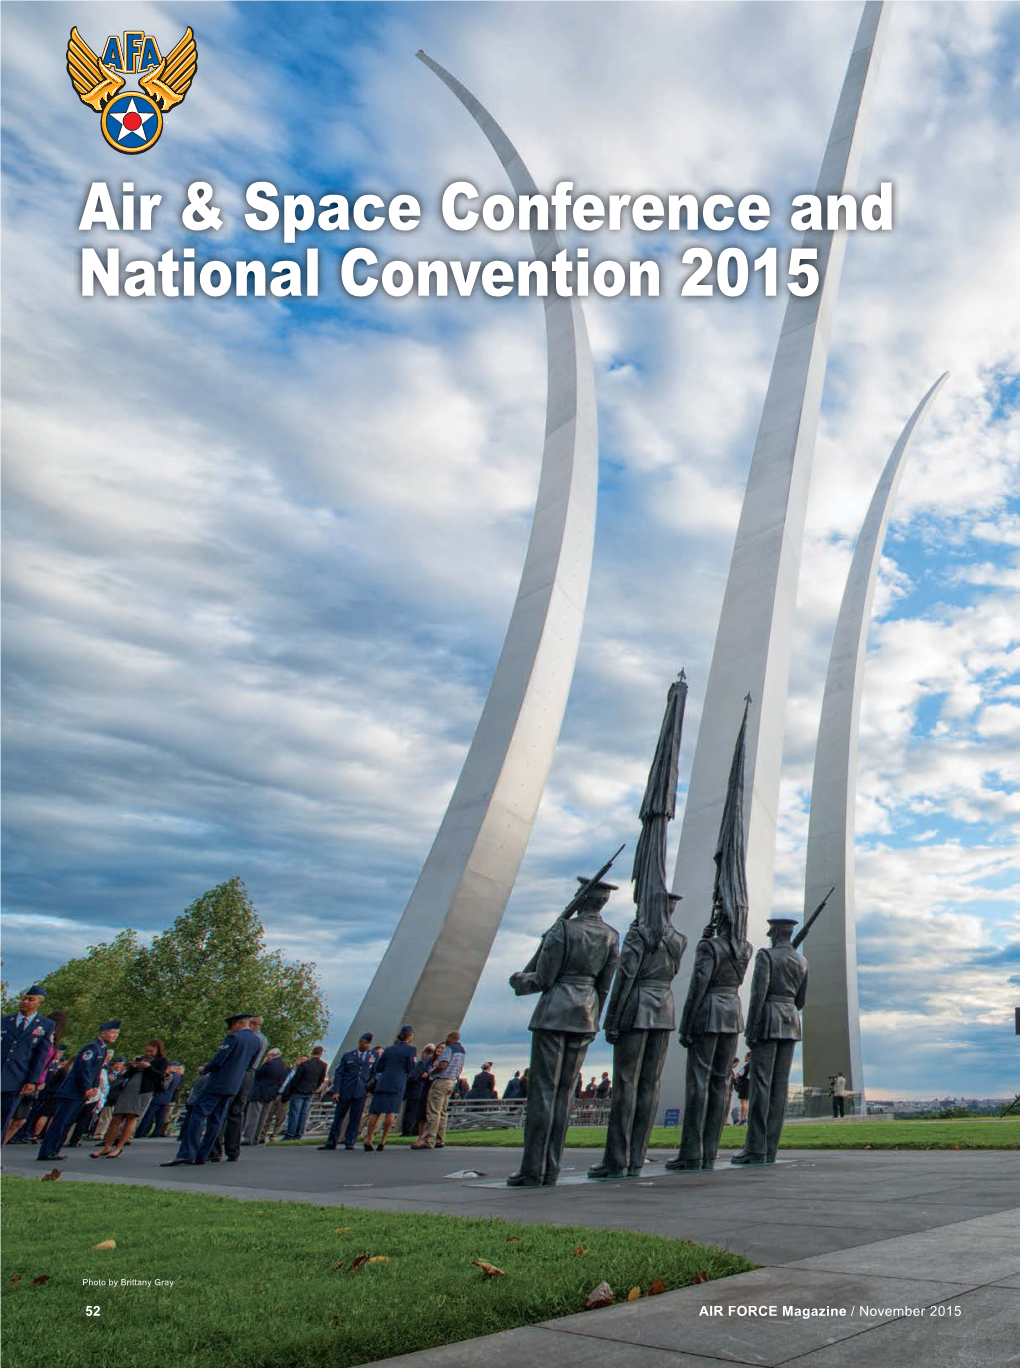 Air & Space Conference and National Convention 2015